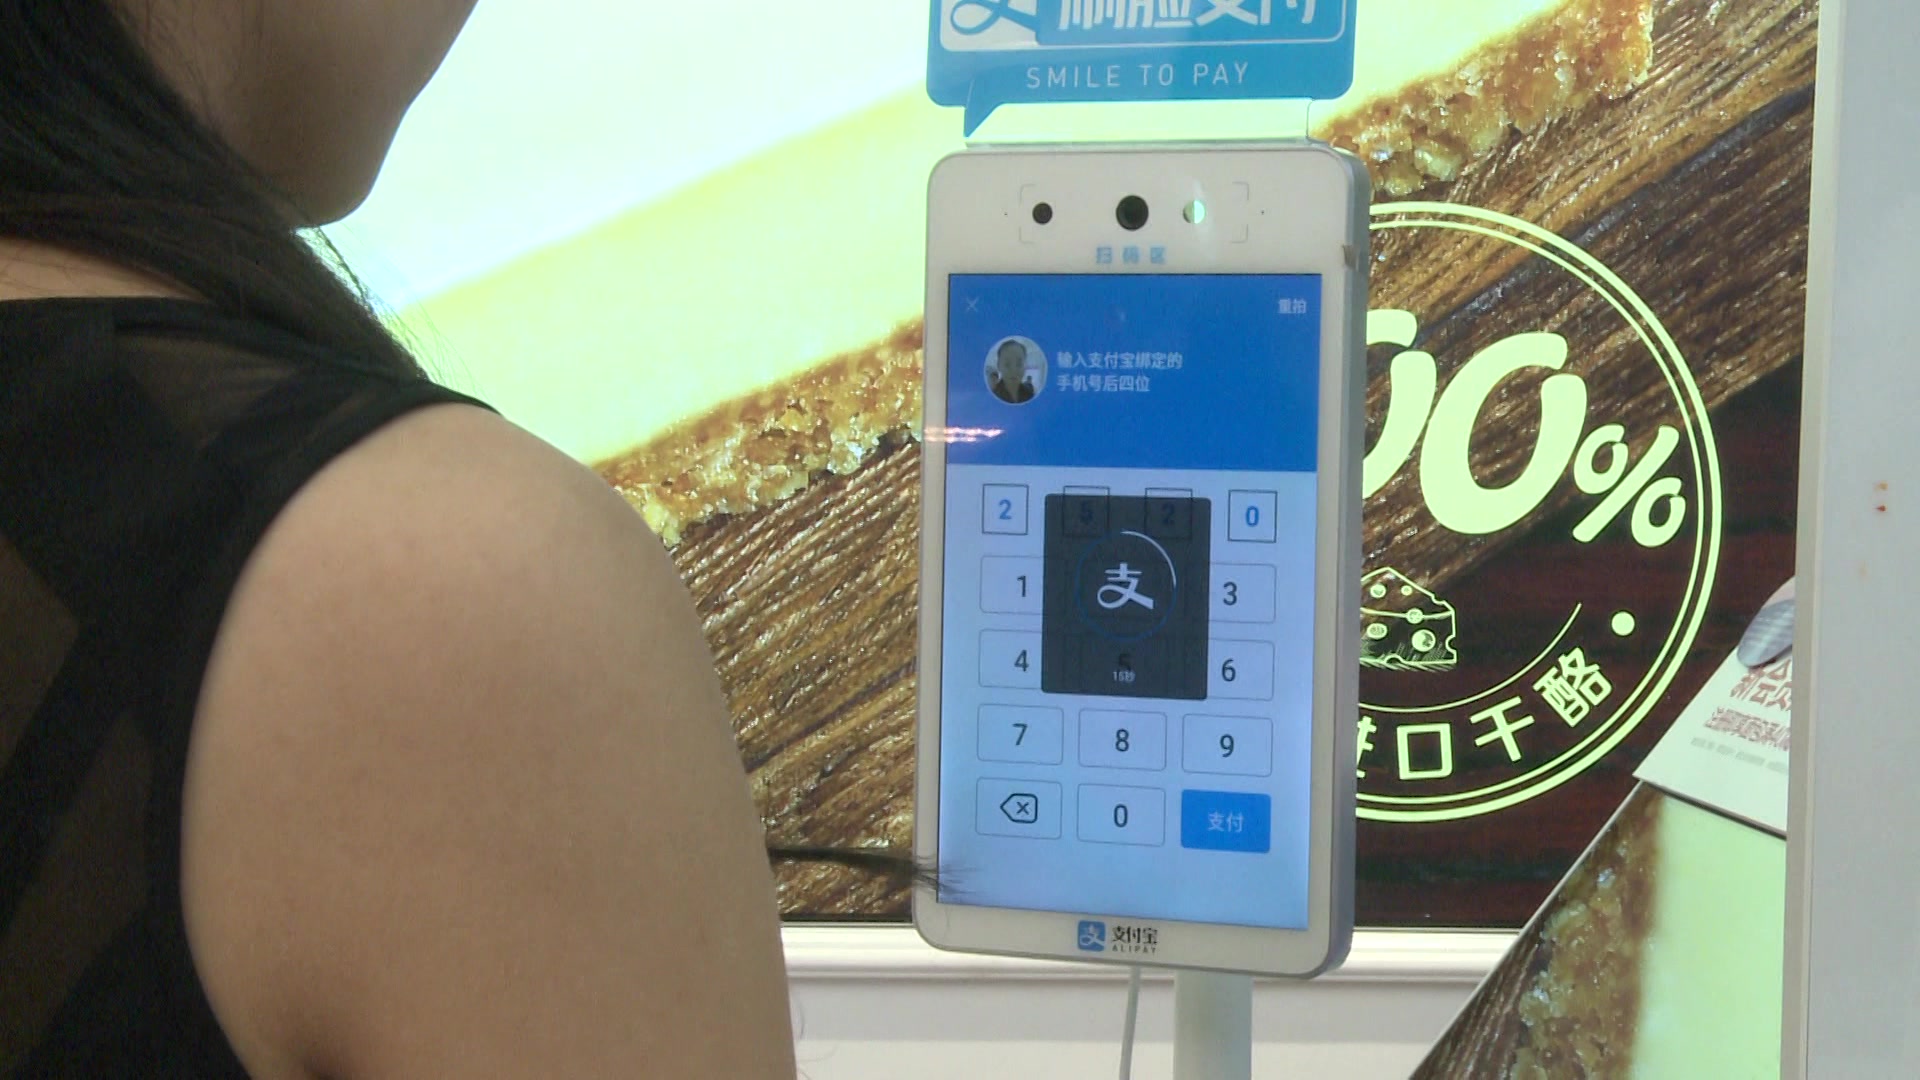 Chinese shoppers adopt facial payments in cashless drive